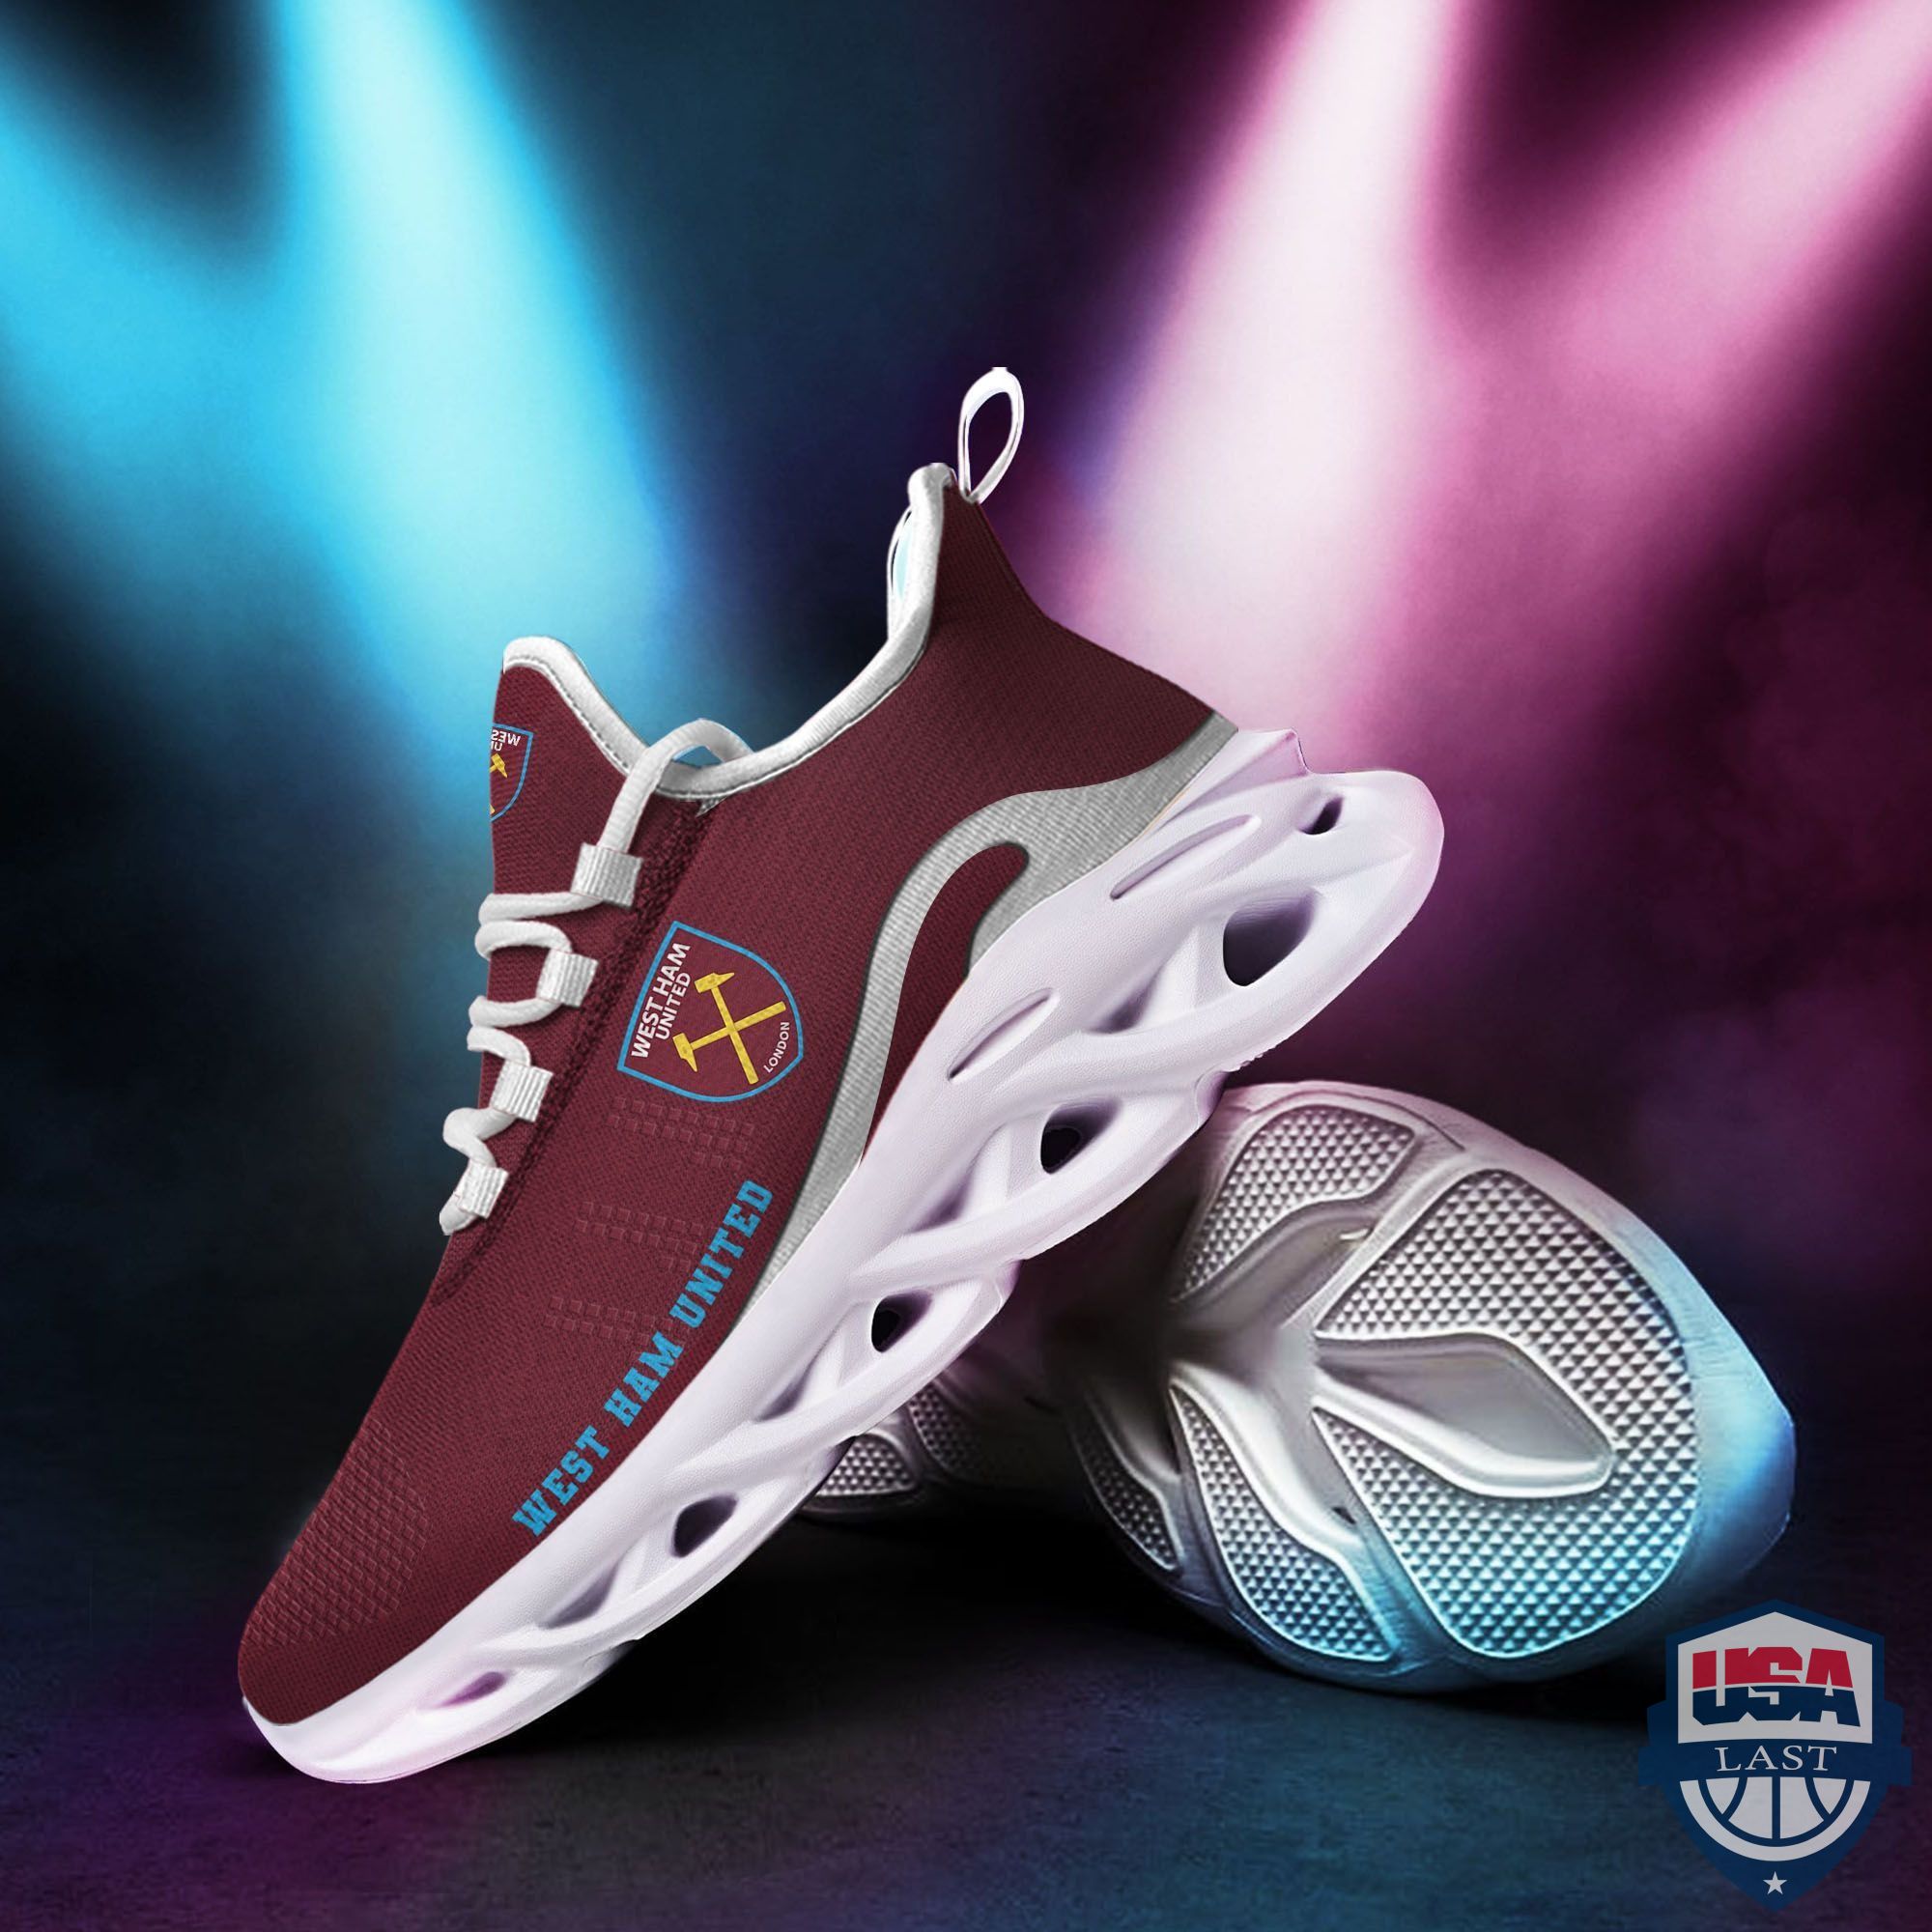 EPL West Ham United Max Soul Clunky Sneaker Shoes